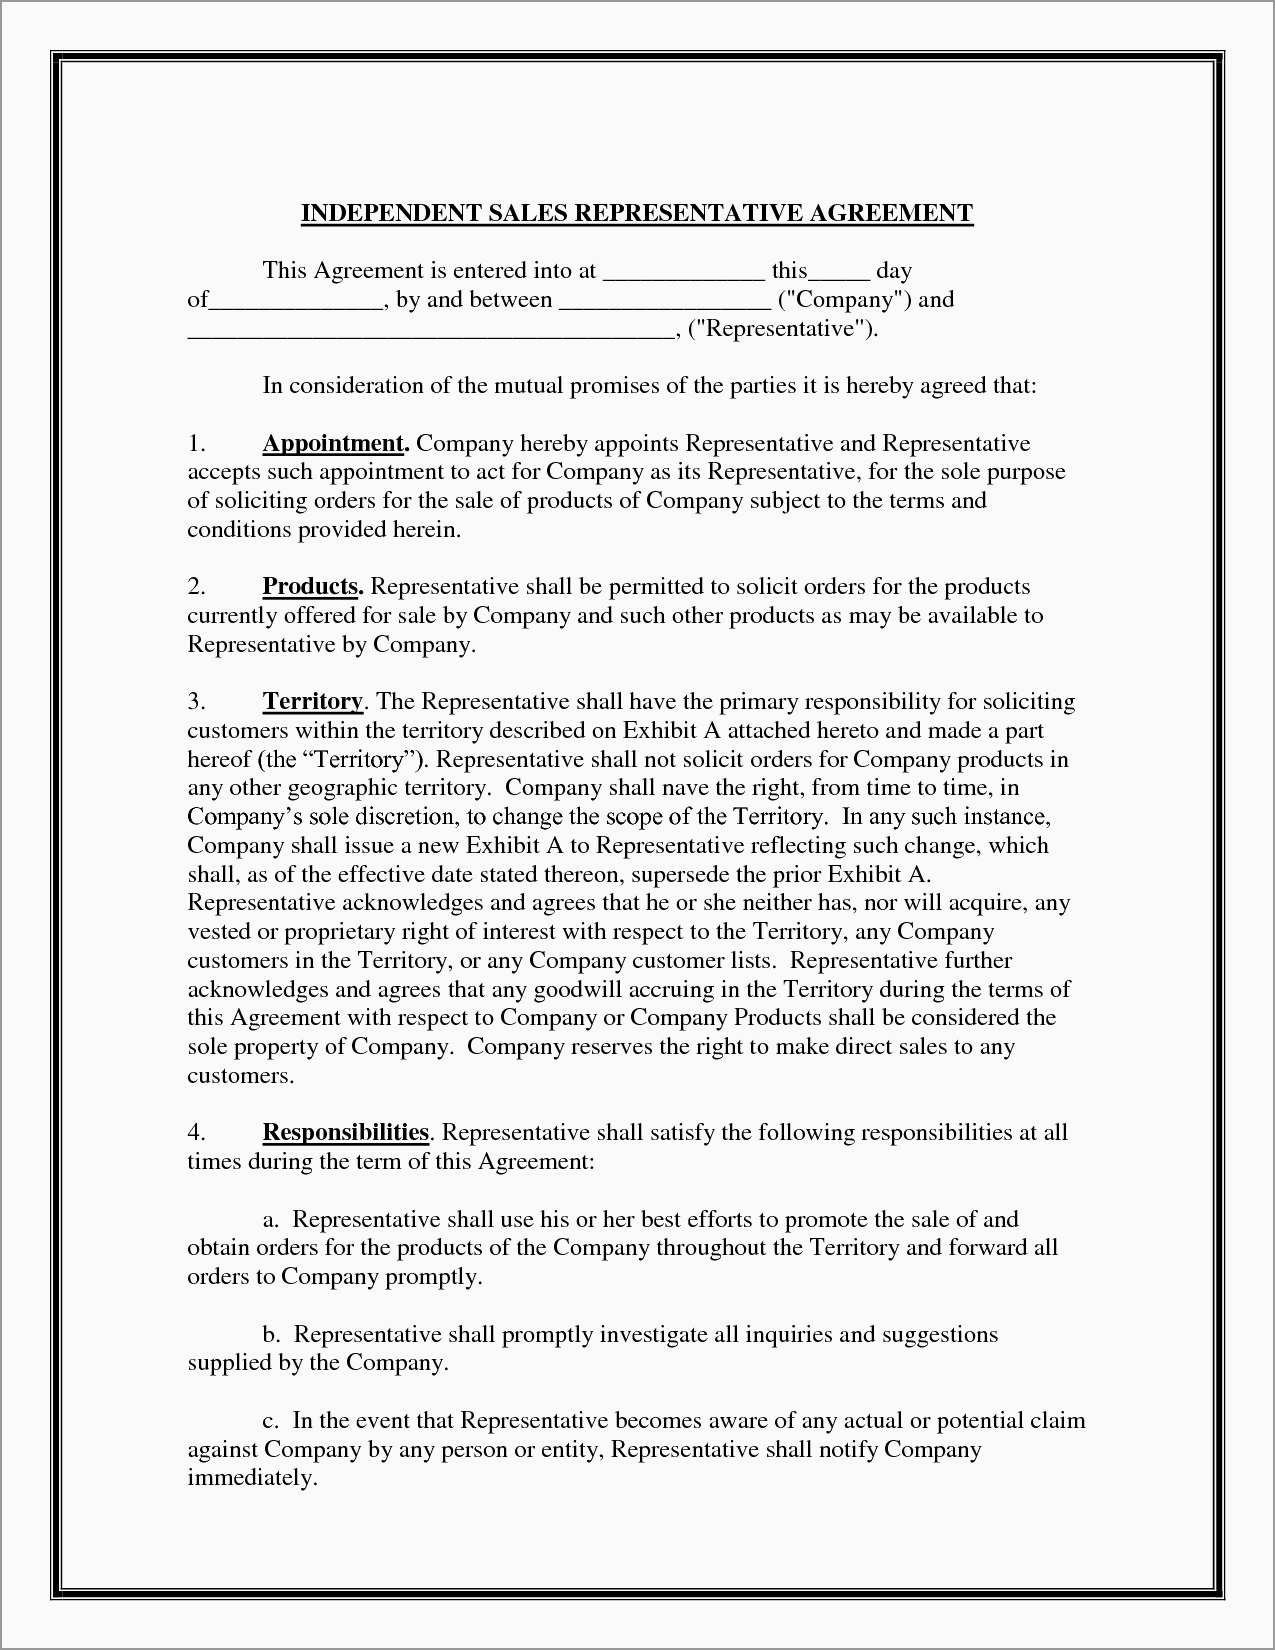 Sales Representative Agreement Template Free Inspirational Free Independent Sales Contractor Agreement Template